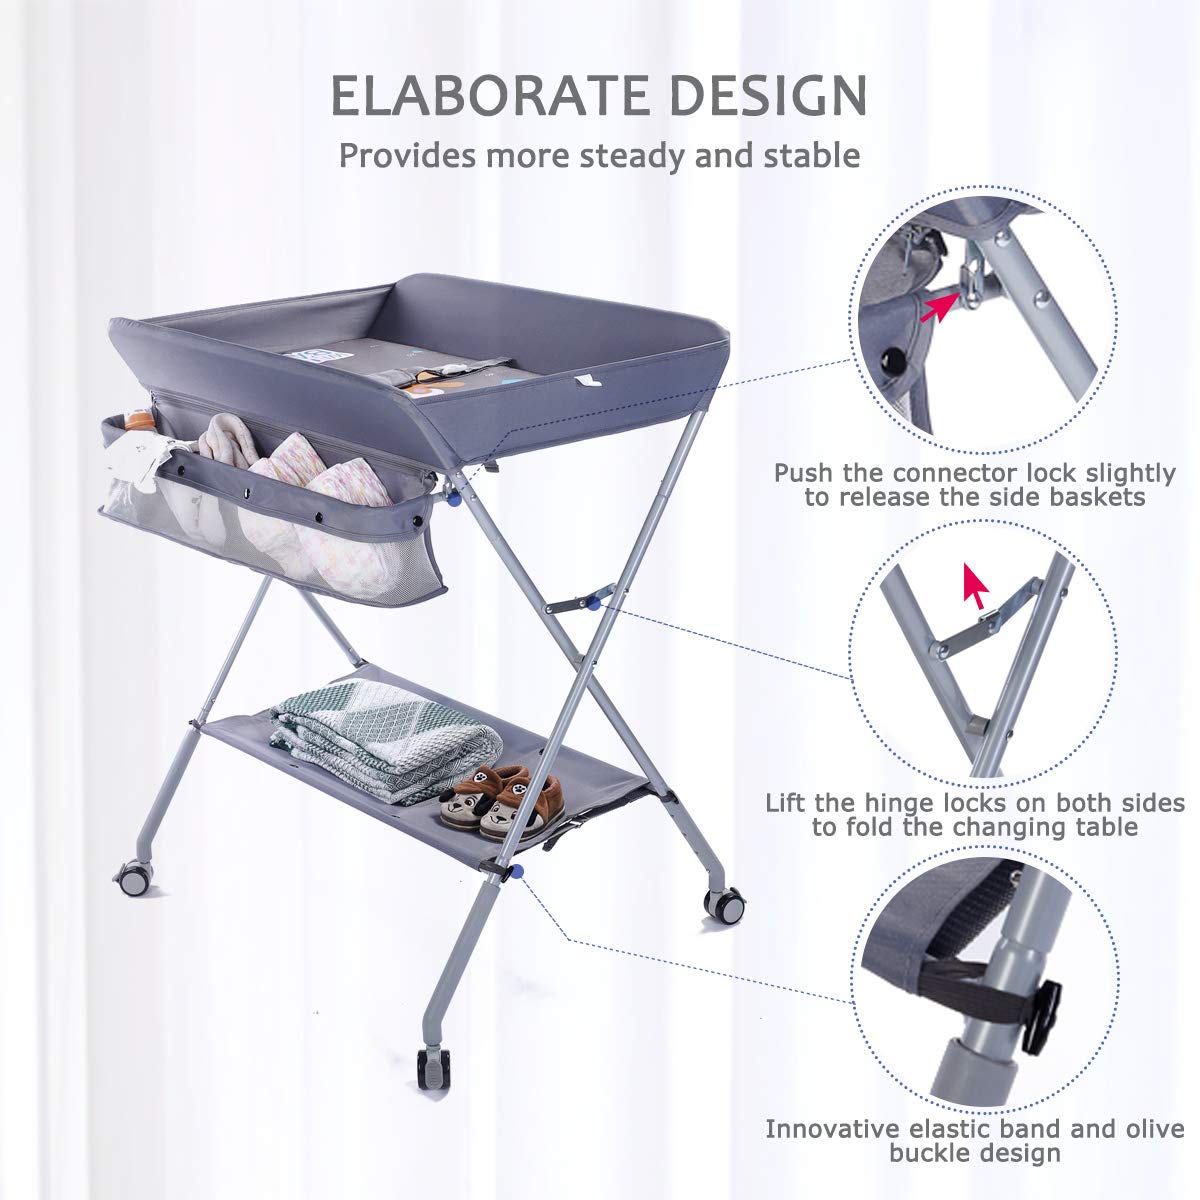 EGREE Baby Portable Folding Diaper Changing Station with Wheels, Adjustable Height Mobile Nursery Organizer with Safety Belt & Large Storage Racks, Newborns & Infant, Gray 1 Count (Pack of 1)